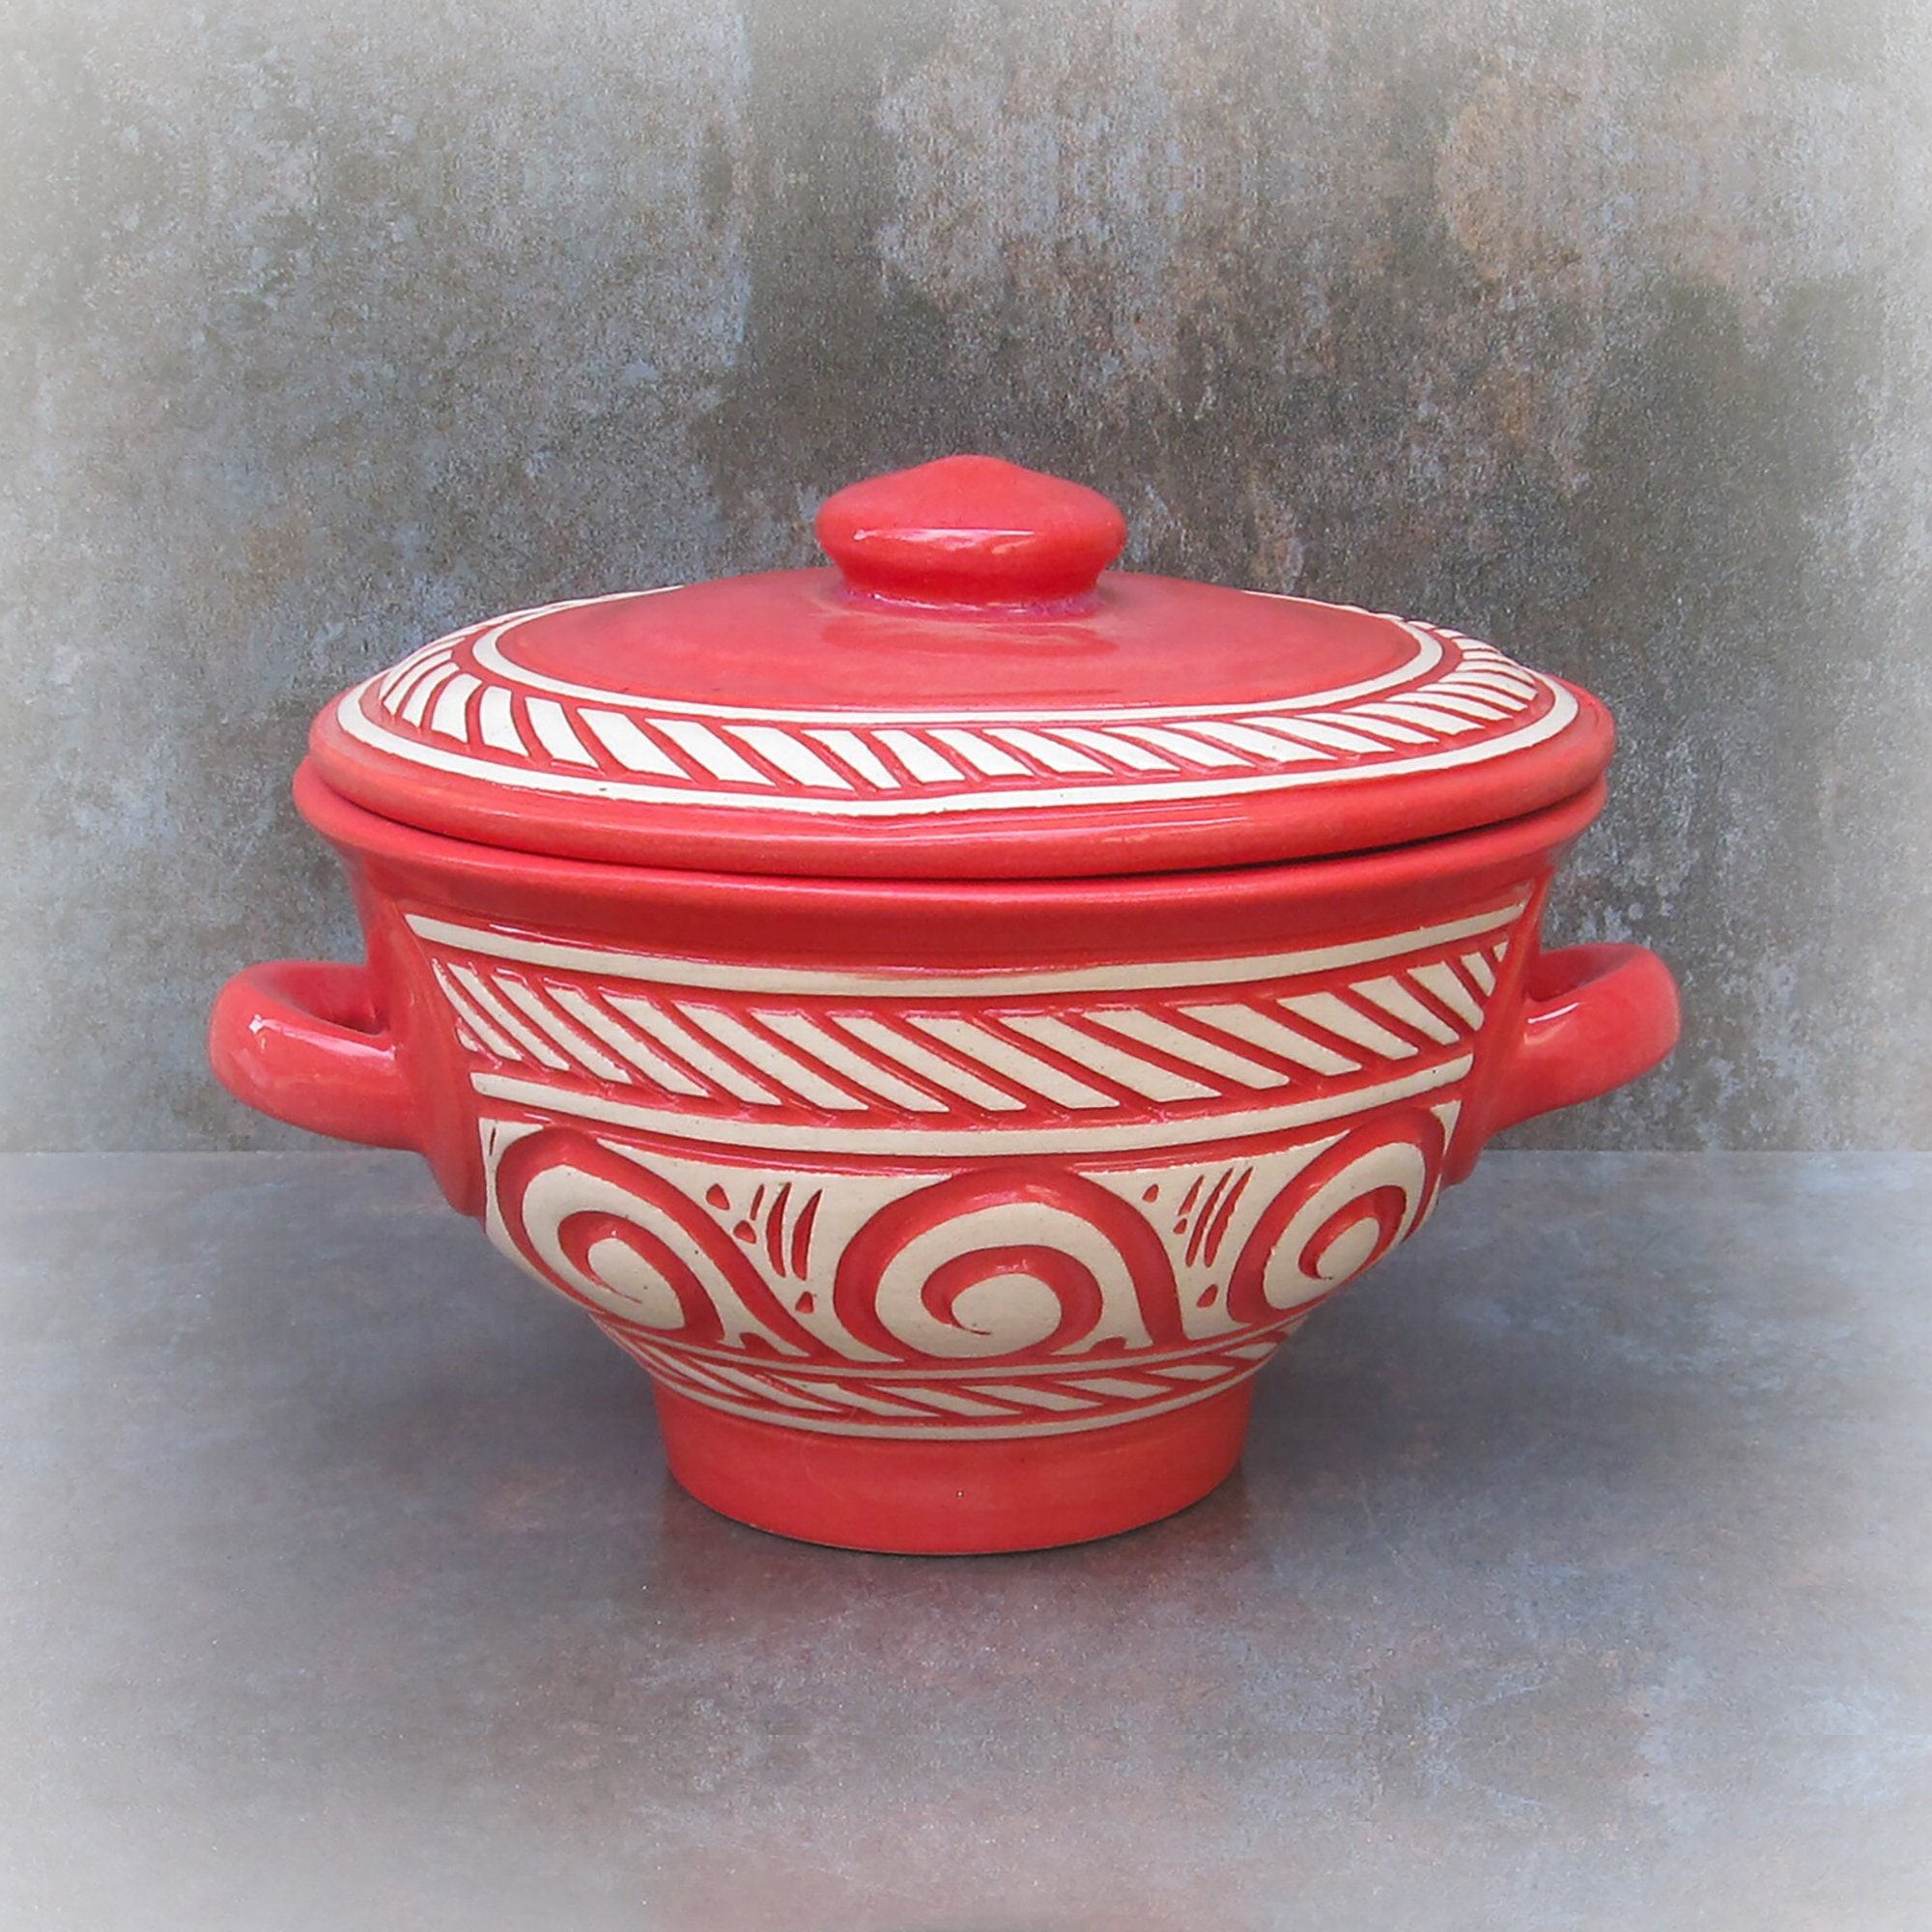 Ceramic Baking Clay Pot Cooking Ceramic Baking Dish Handcrafted